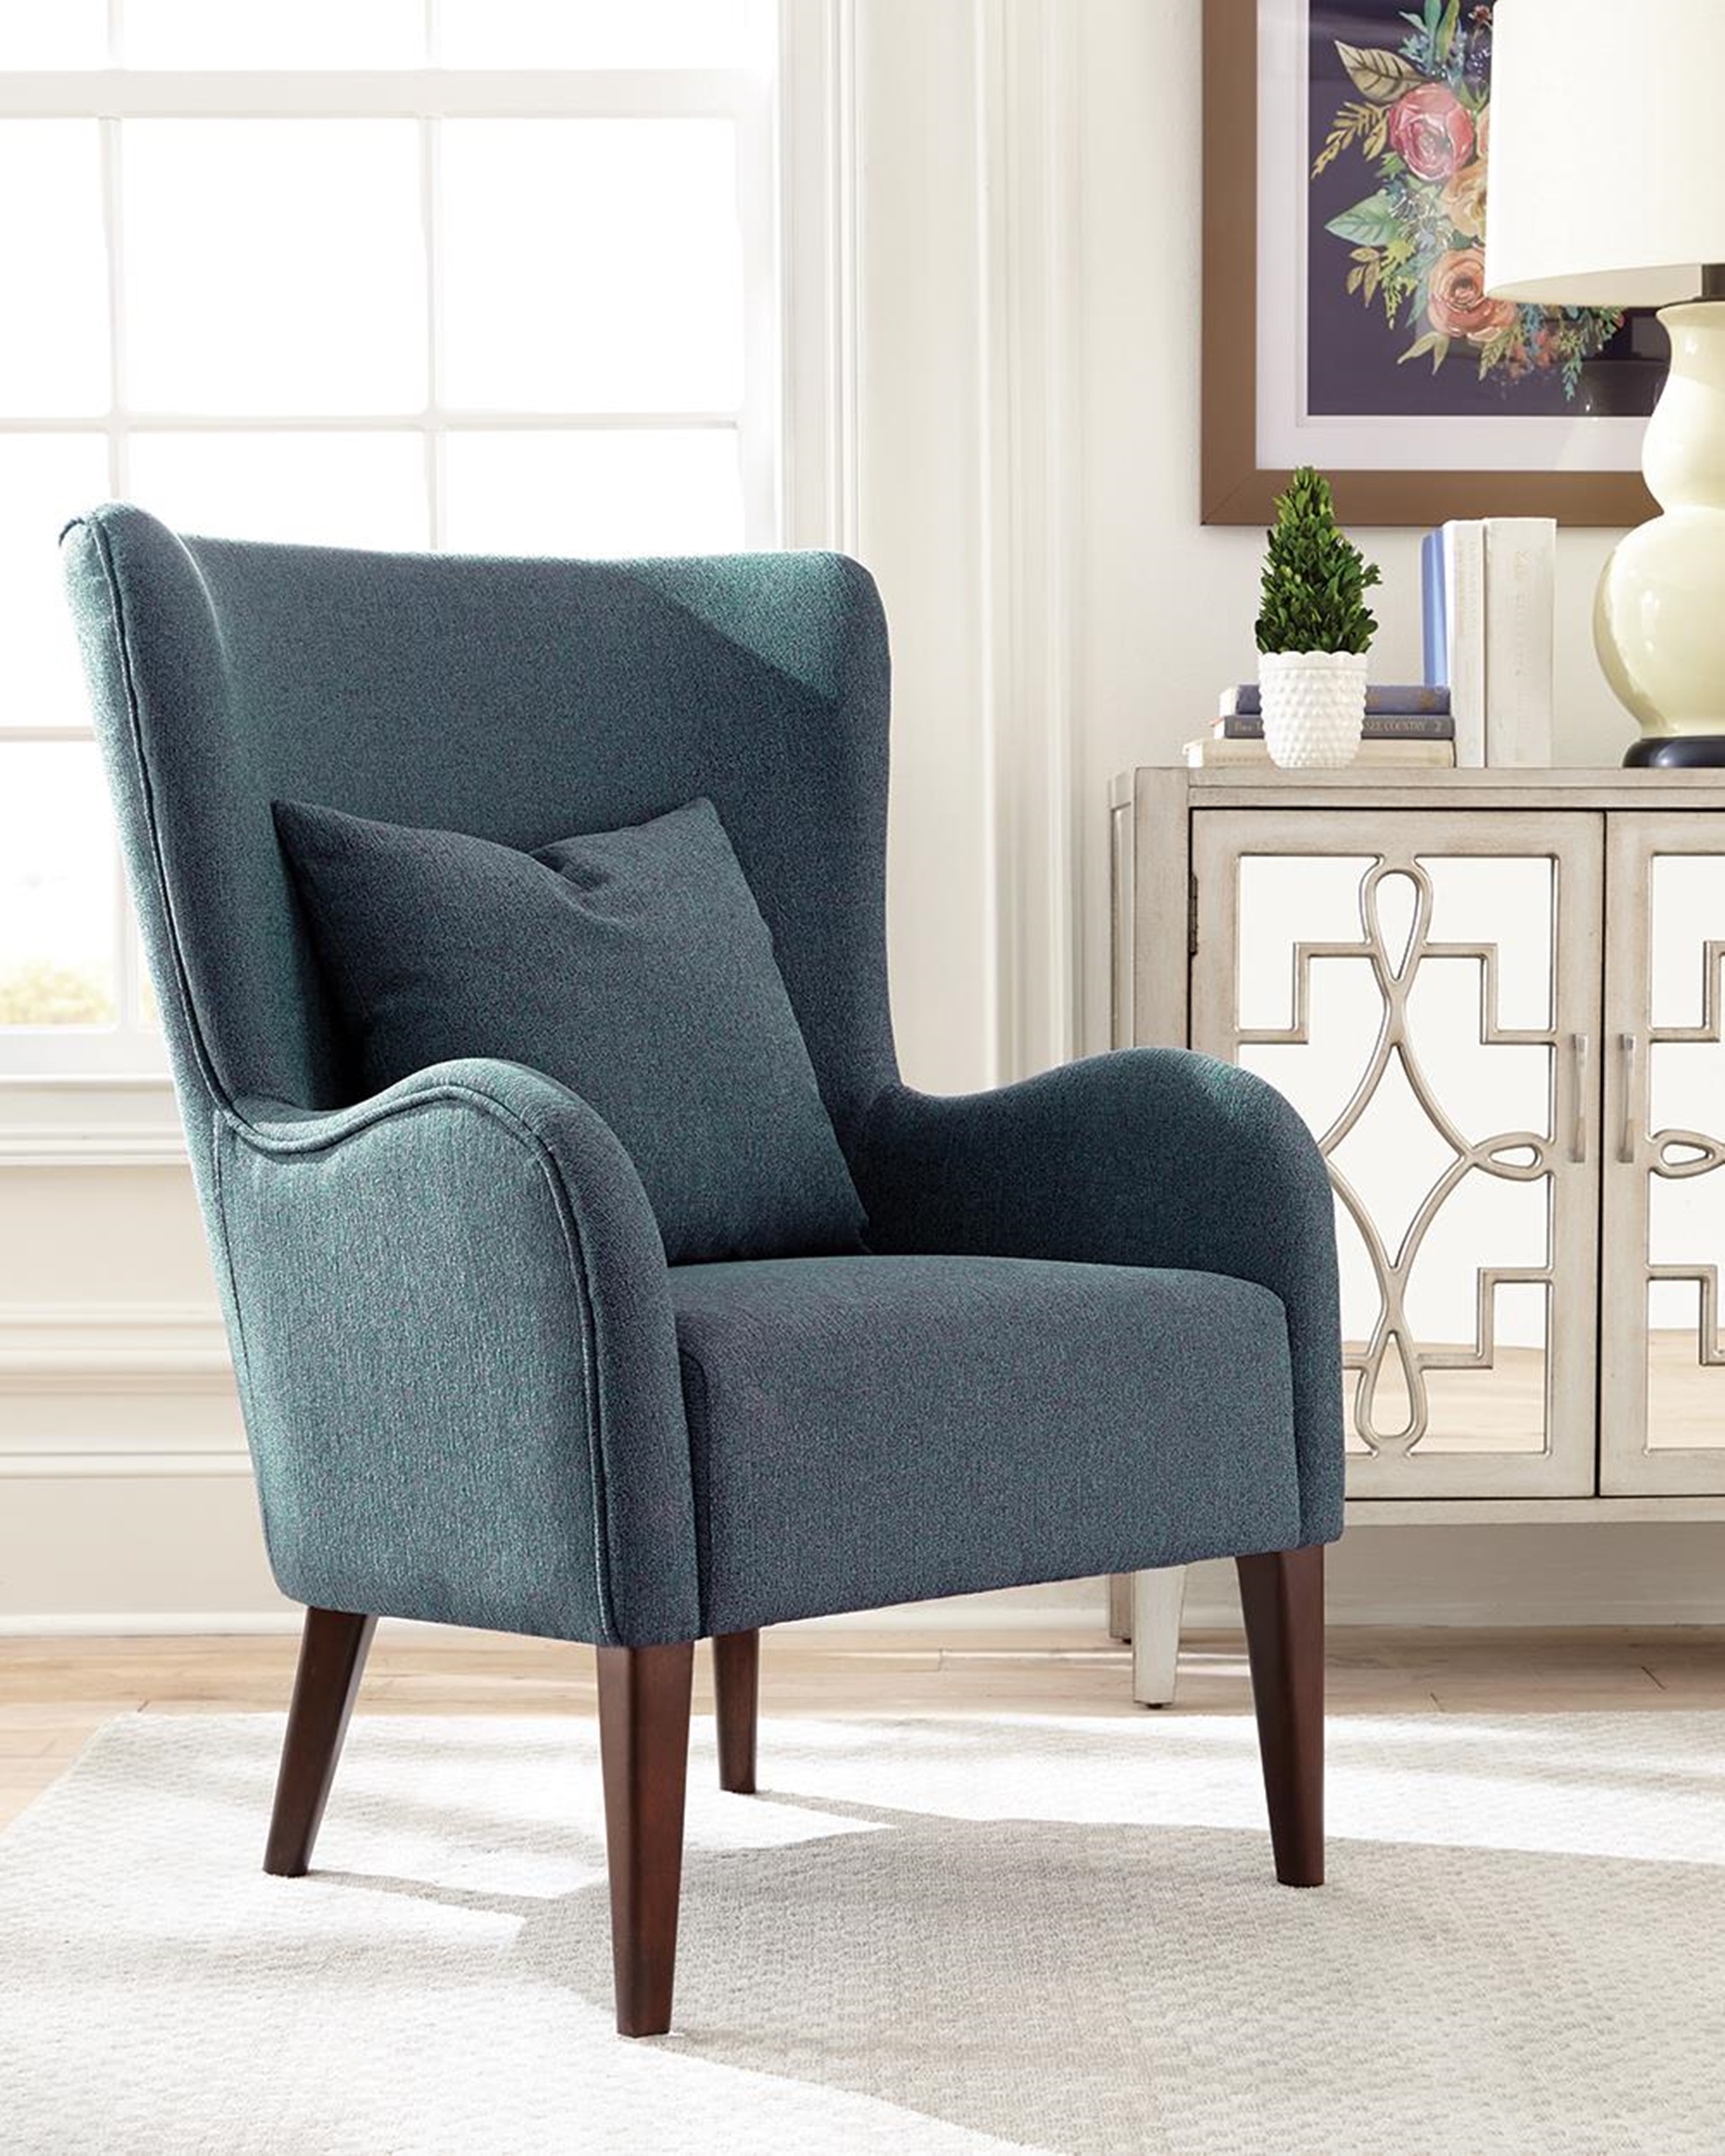 Dark Teal Winged Accent Chair - Click Image to Close